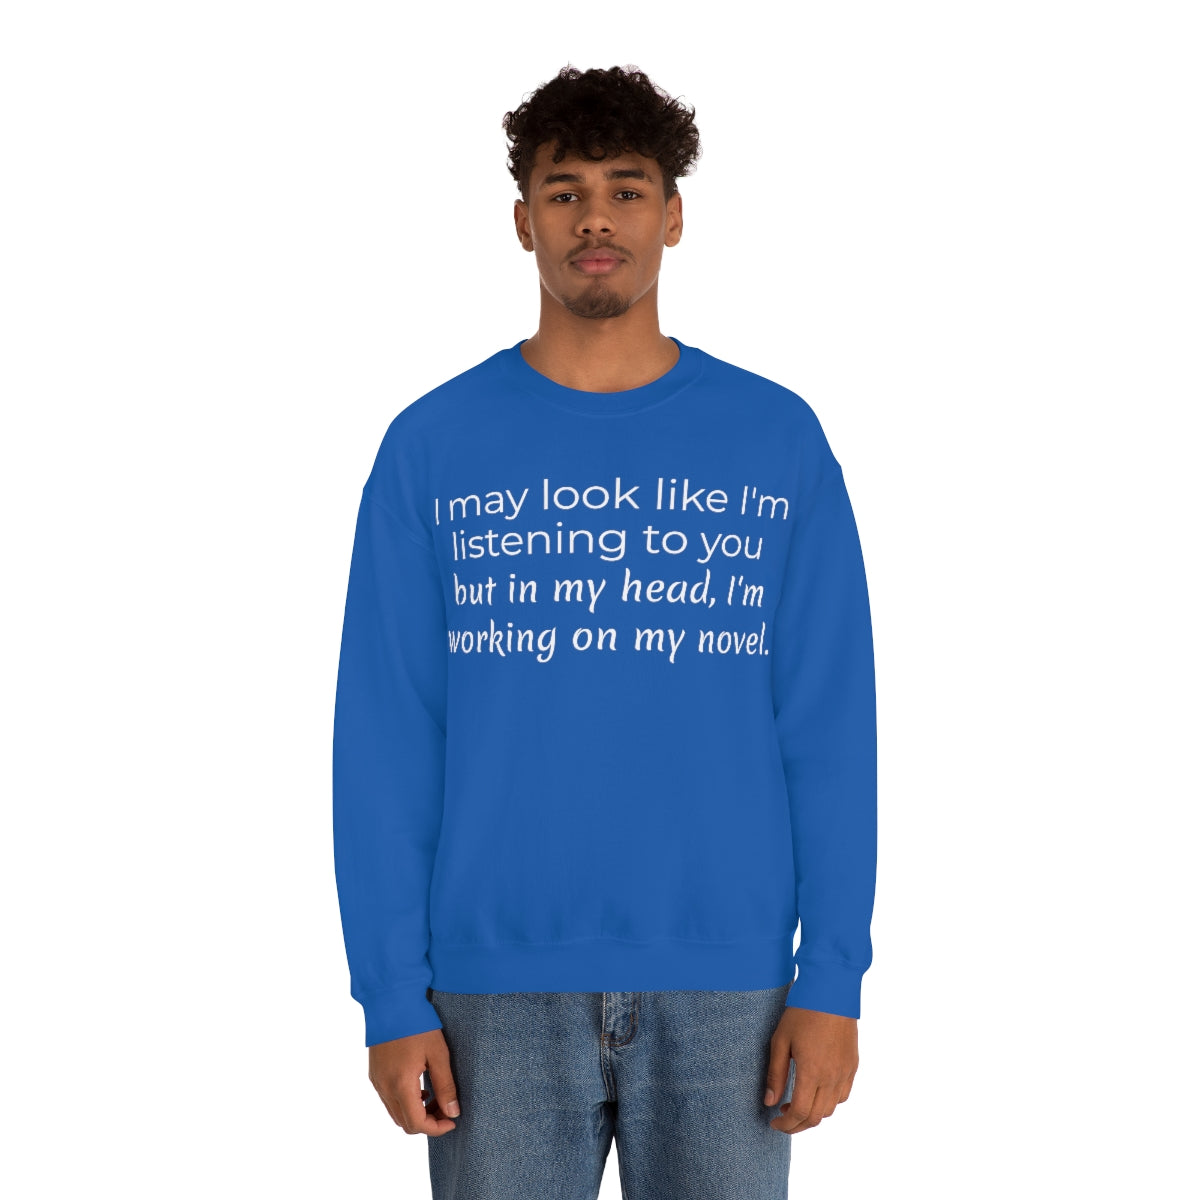 I may look like I'm listening to you, but in my head I'm writing my novel | Writer Gift | Writing T-shirt | Gifts for Writers | Unisex Heavy Blend™ Crewneck Sweatshirt